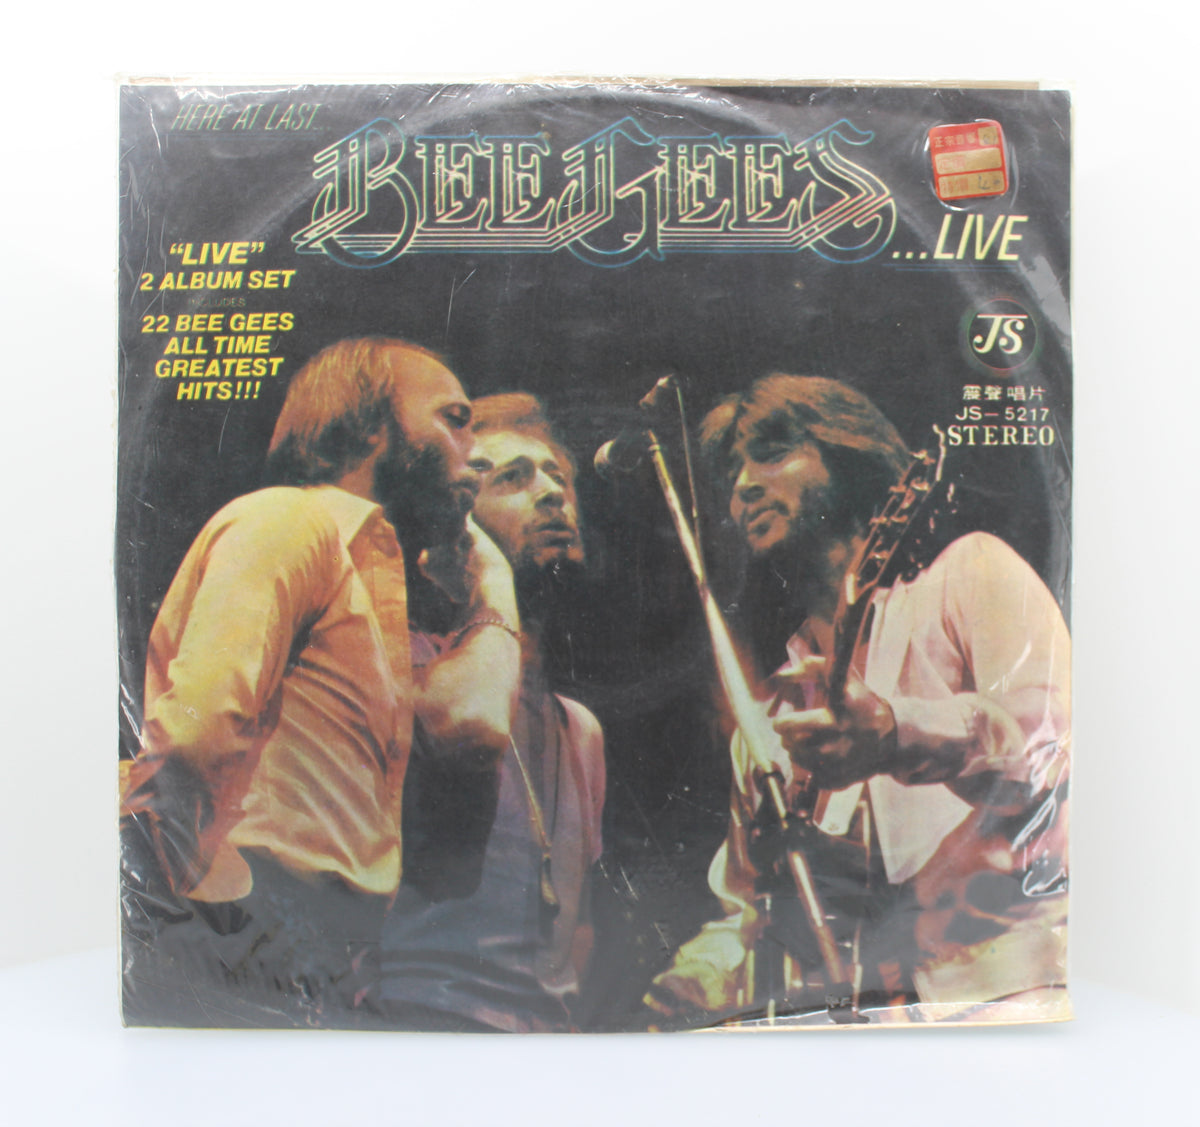 Bee Gees - Here At Last, 2x Vinyl (33⅓ rpm), Taiwan 1977